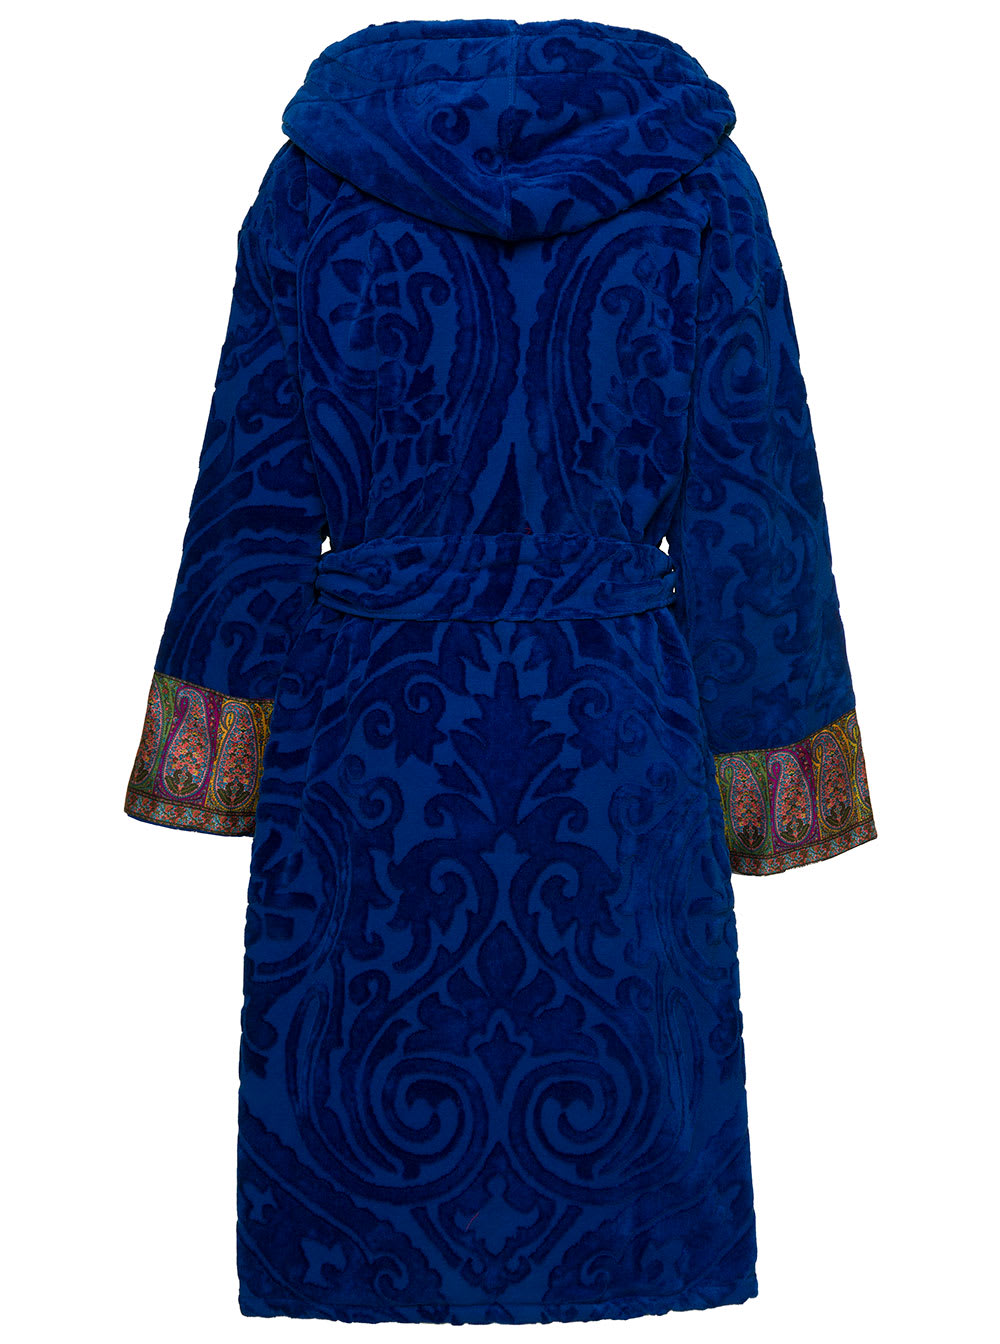 Etro New Tradition Blue Hooded Bath Robe With Ornamental Print  Home